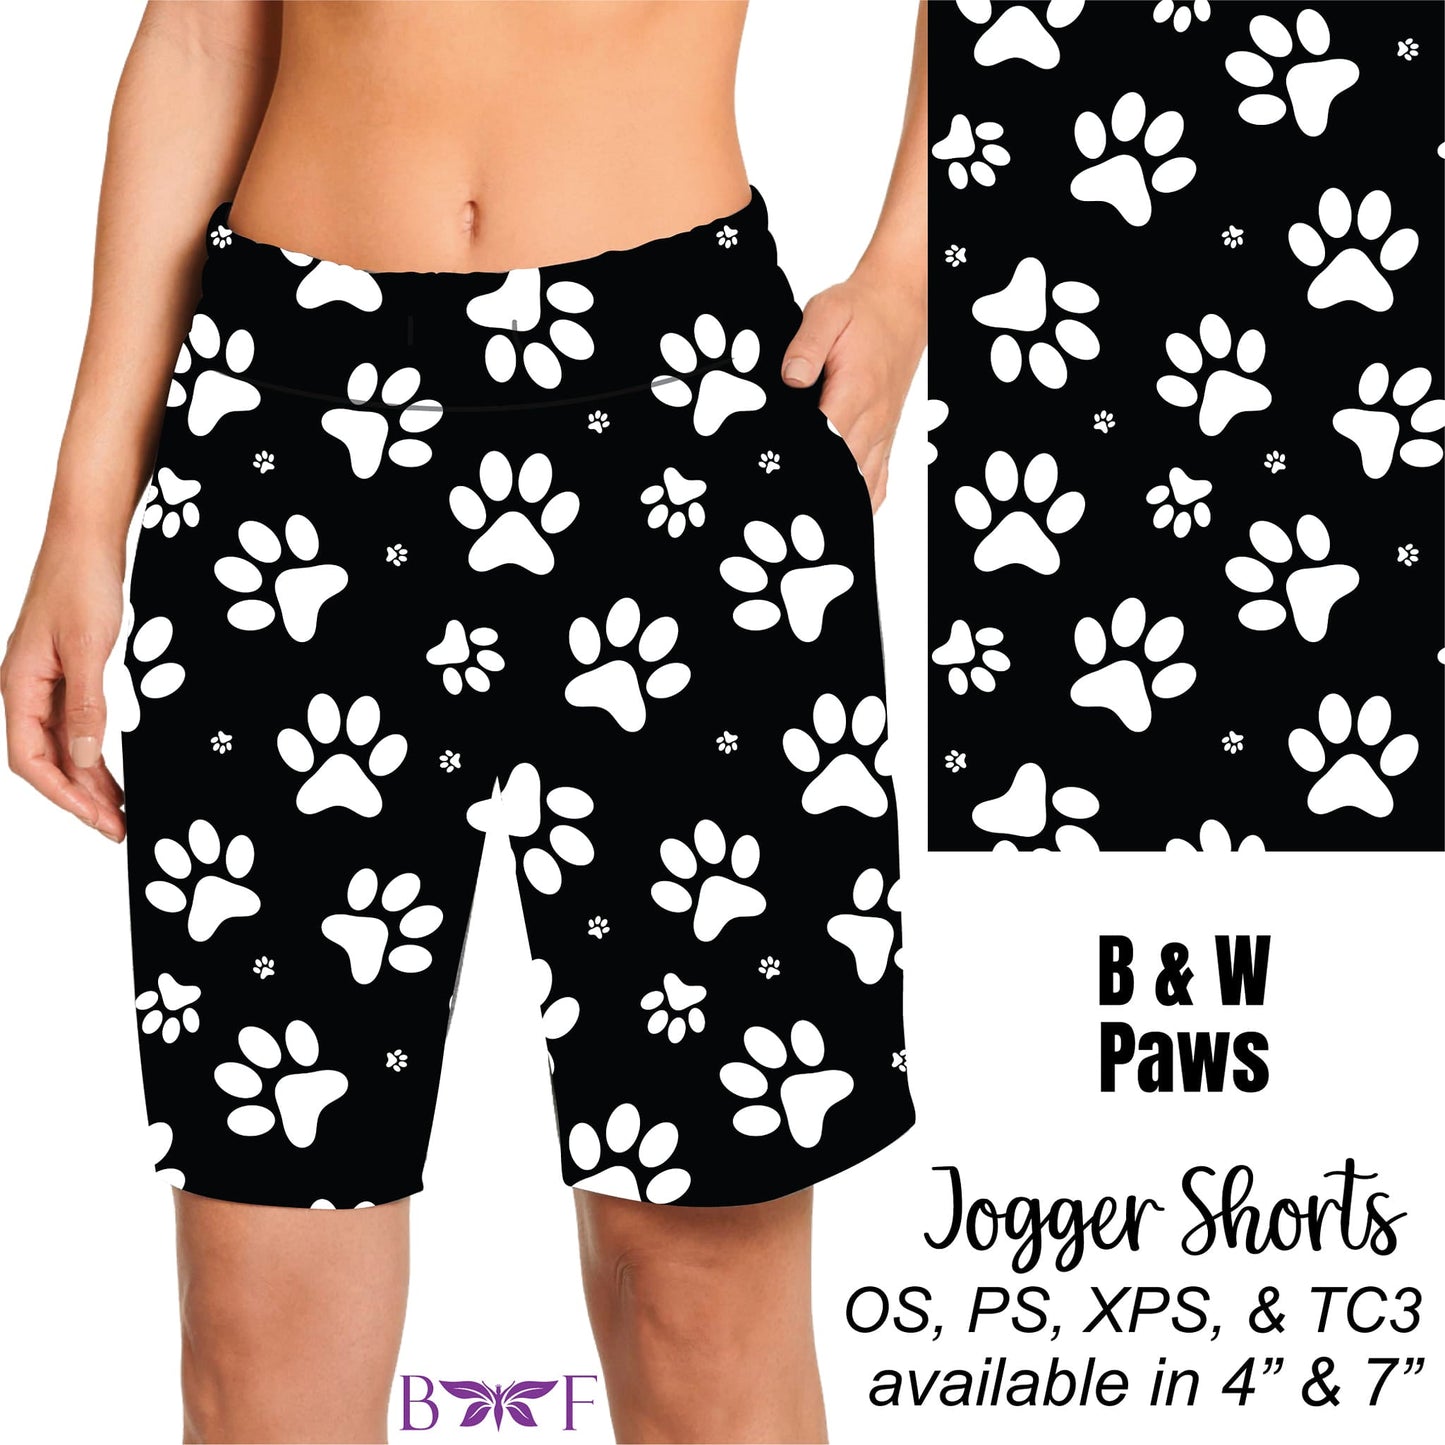 B & W Paws Leggings and Capris with pockets